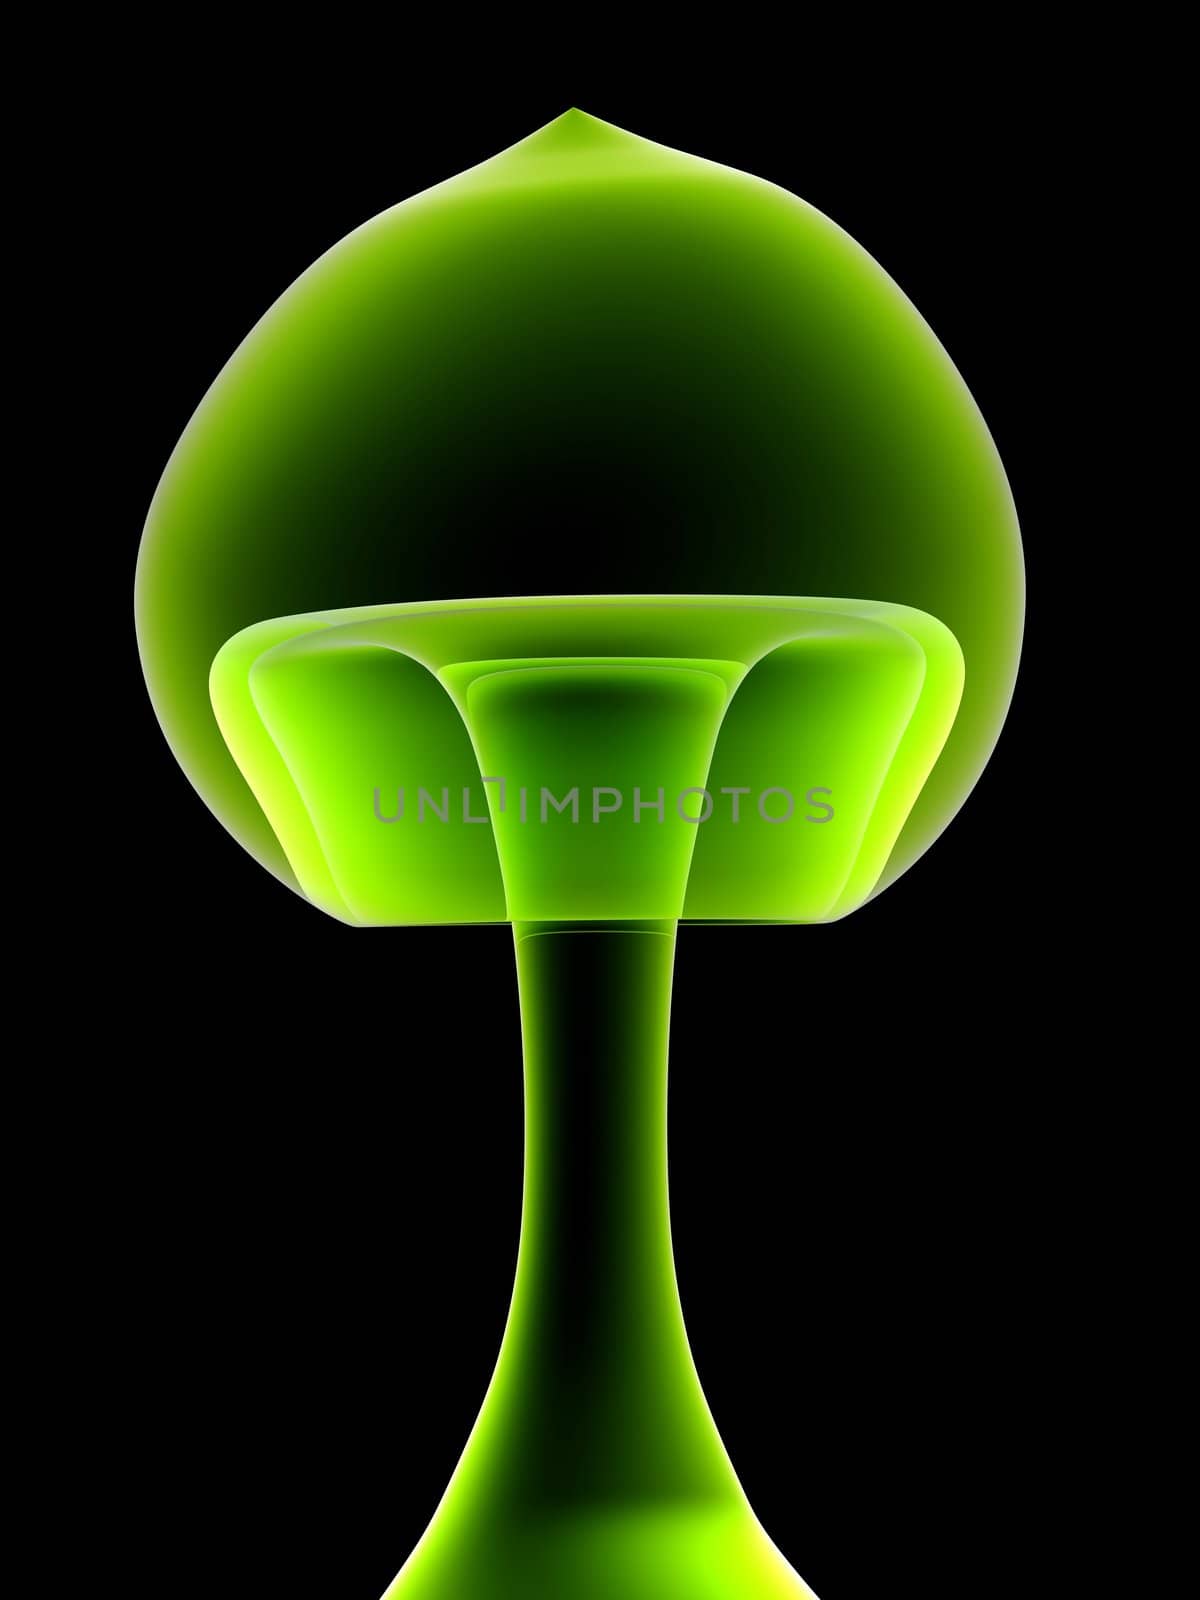 Freaky translucent Mushroom
 by Spectral